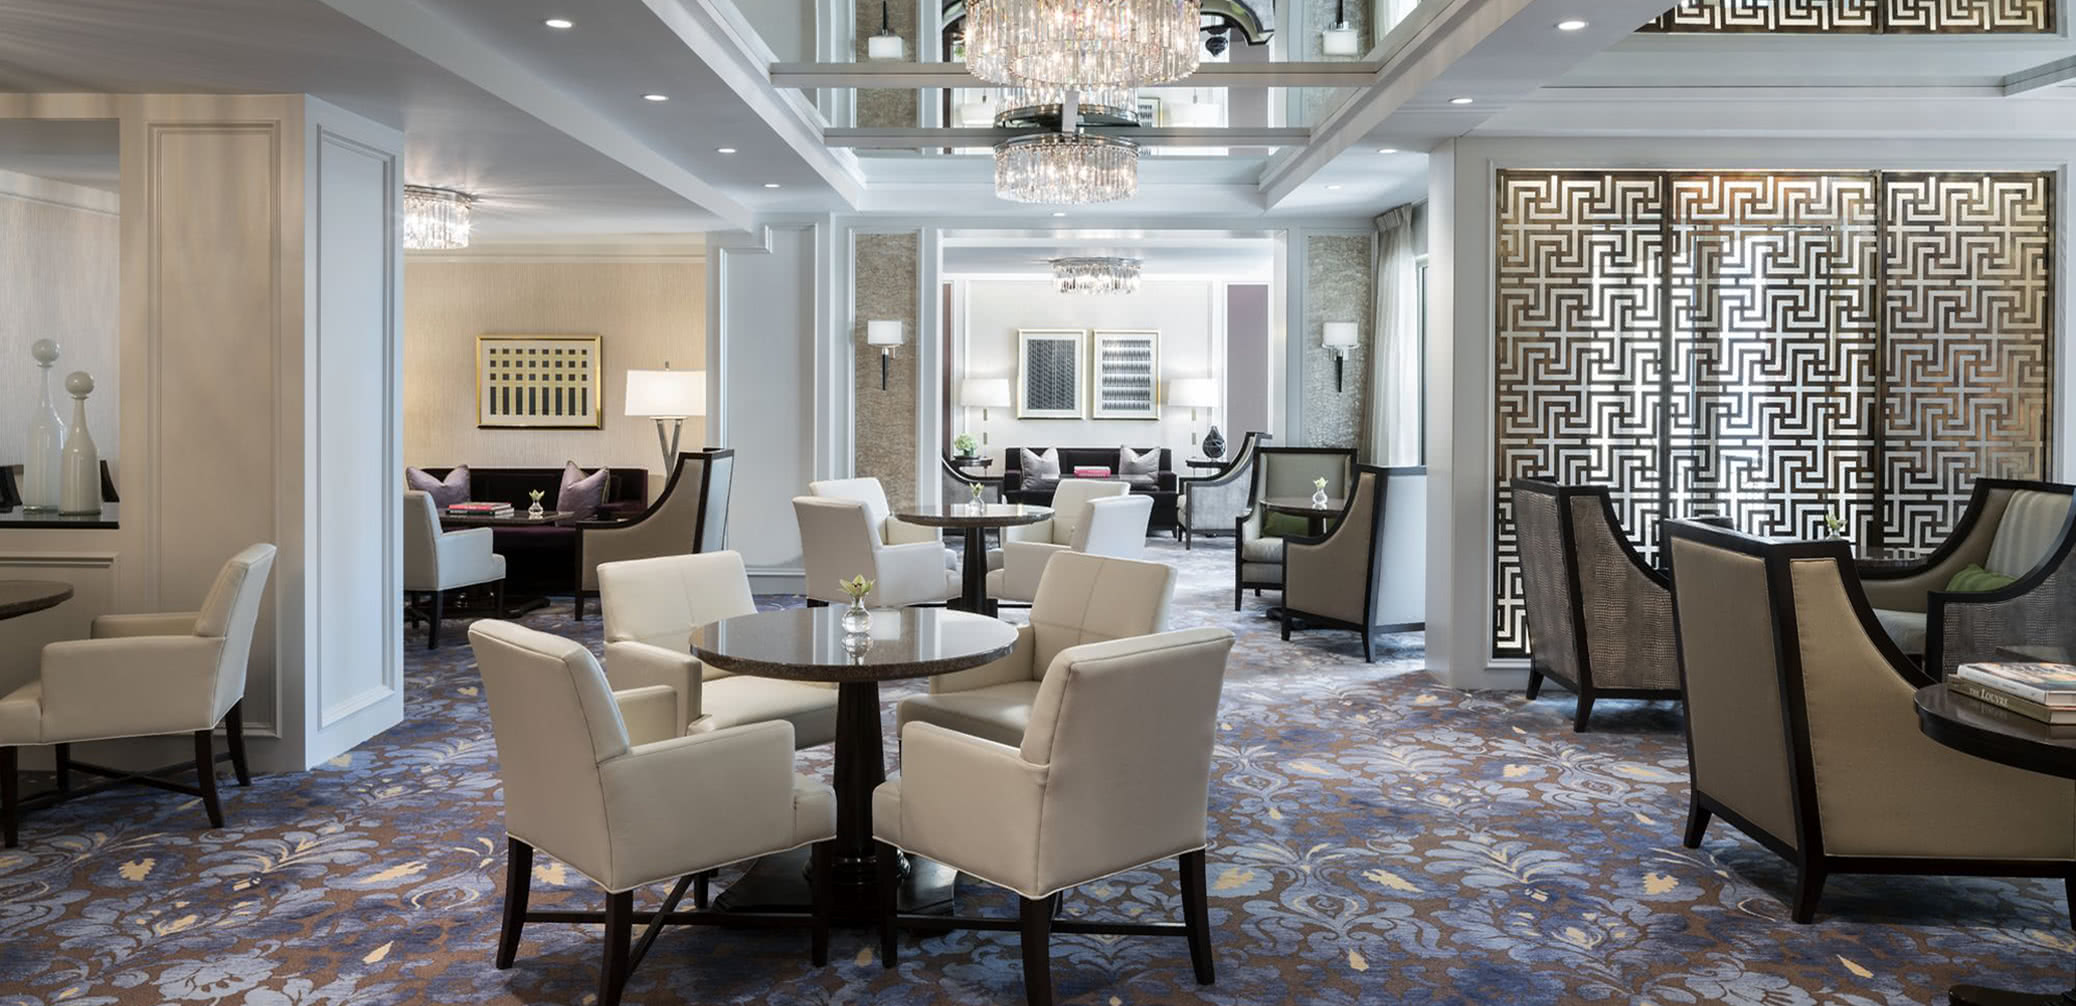 Best Hotel Executive Club Lounges In Dallas, Texas